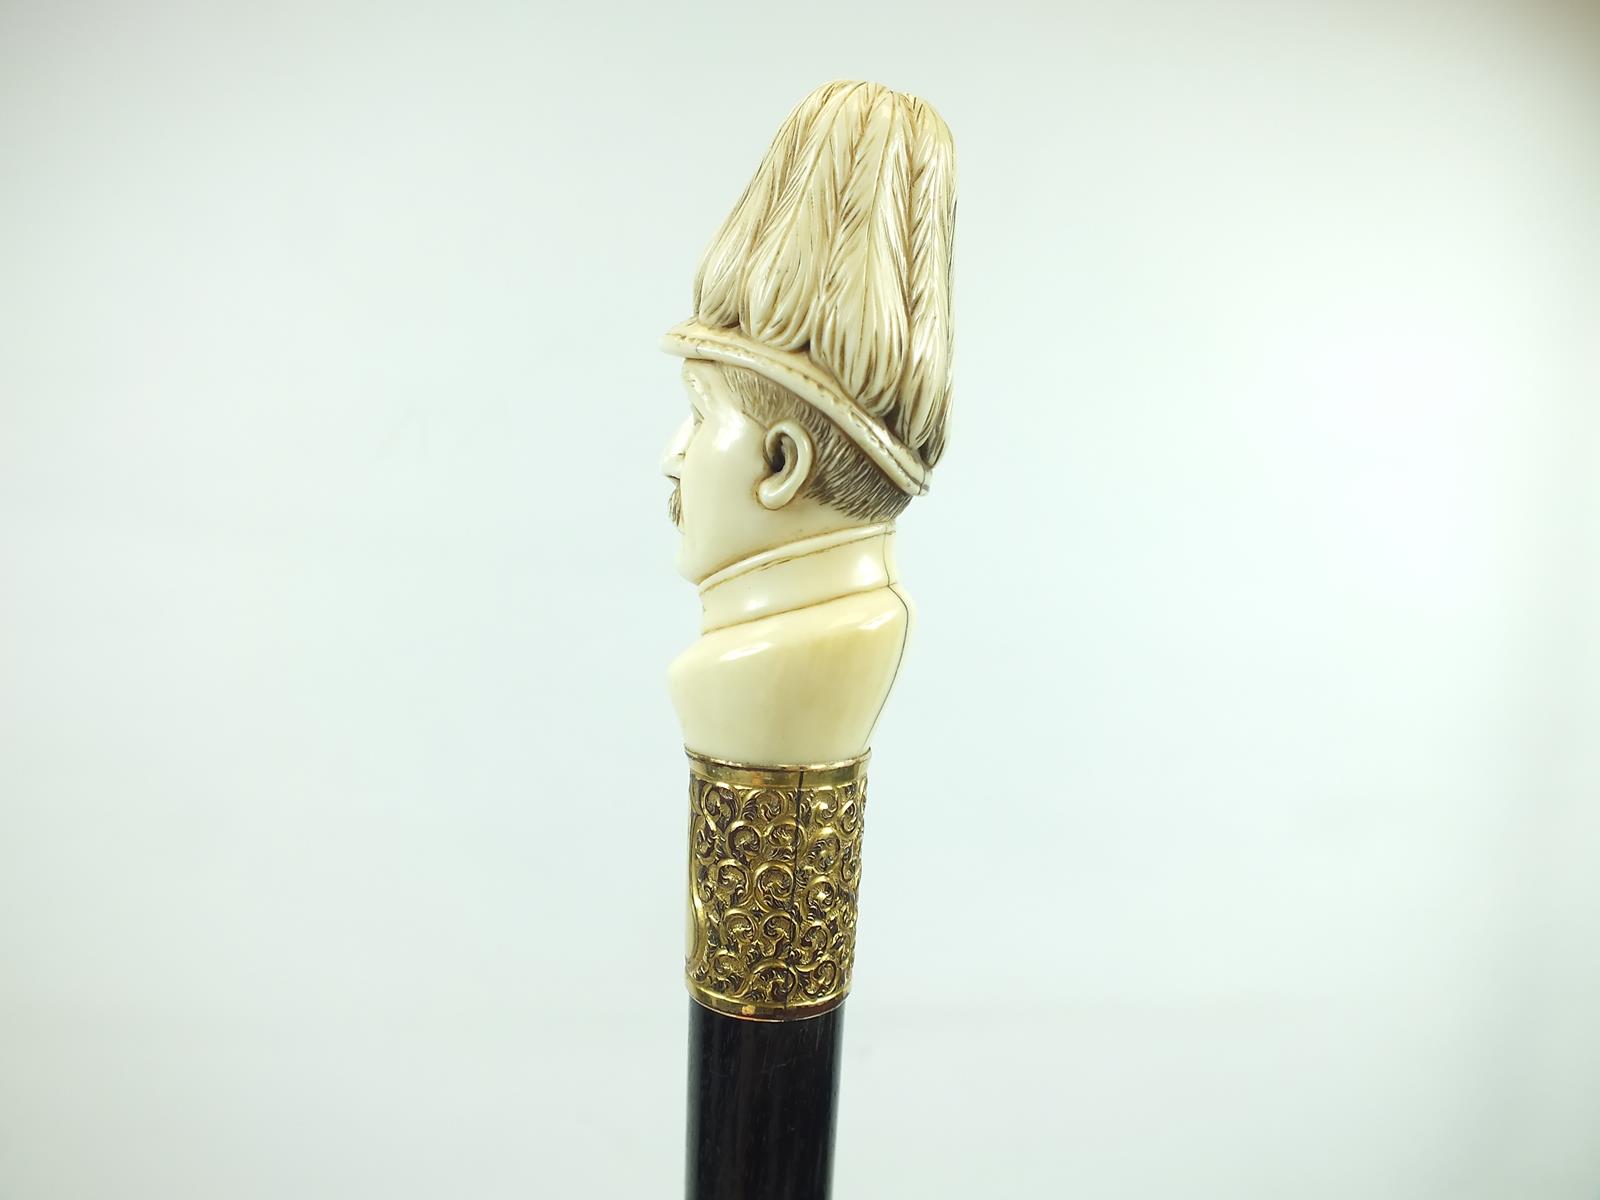 A LATE 19TH/EARLY 20TH CENTURY WALKING CANE, the pommel carved as the head of an officer - Image 4 of 9